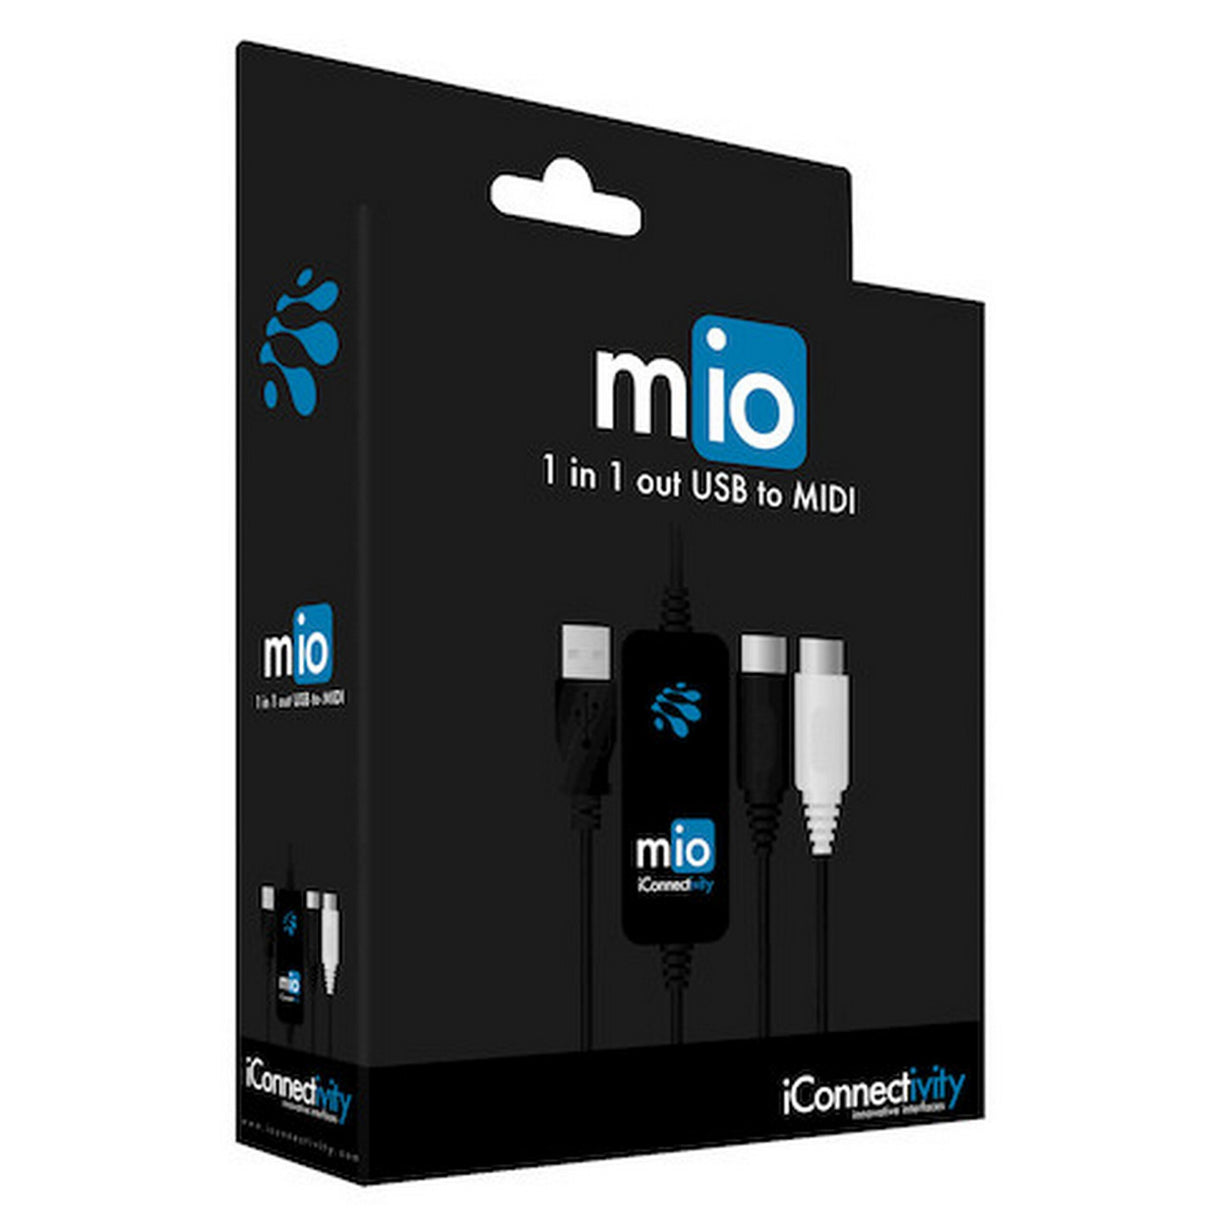 iConnectivity mio 1 x 1 MIDI to USB Interface for Mac and PC